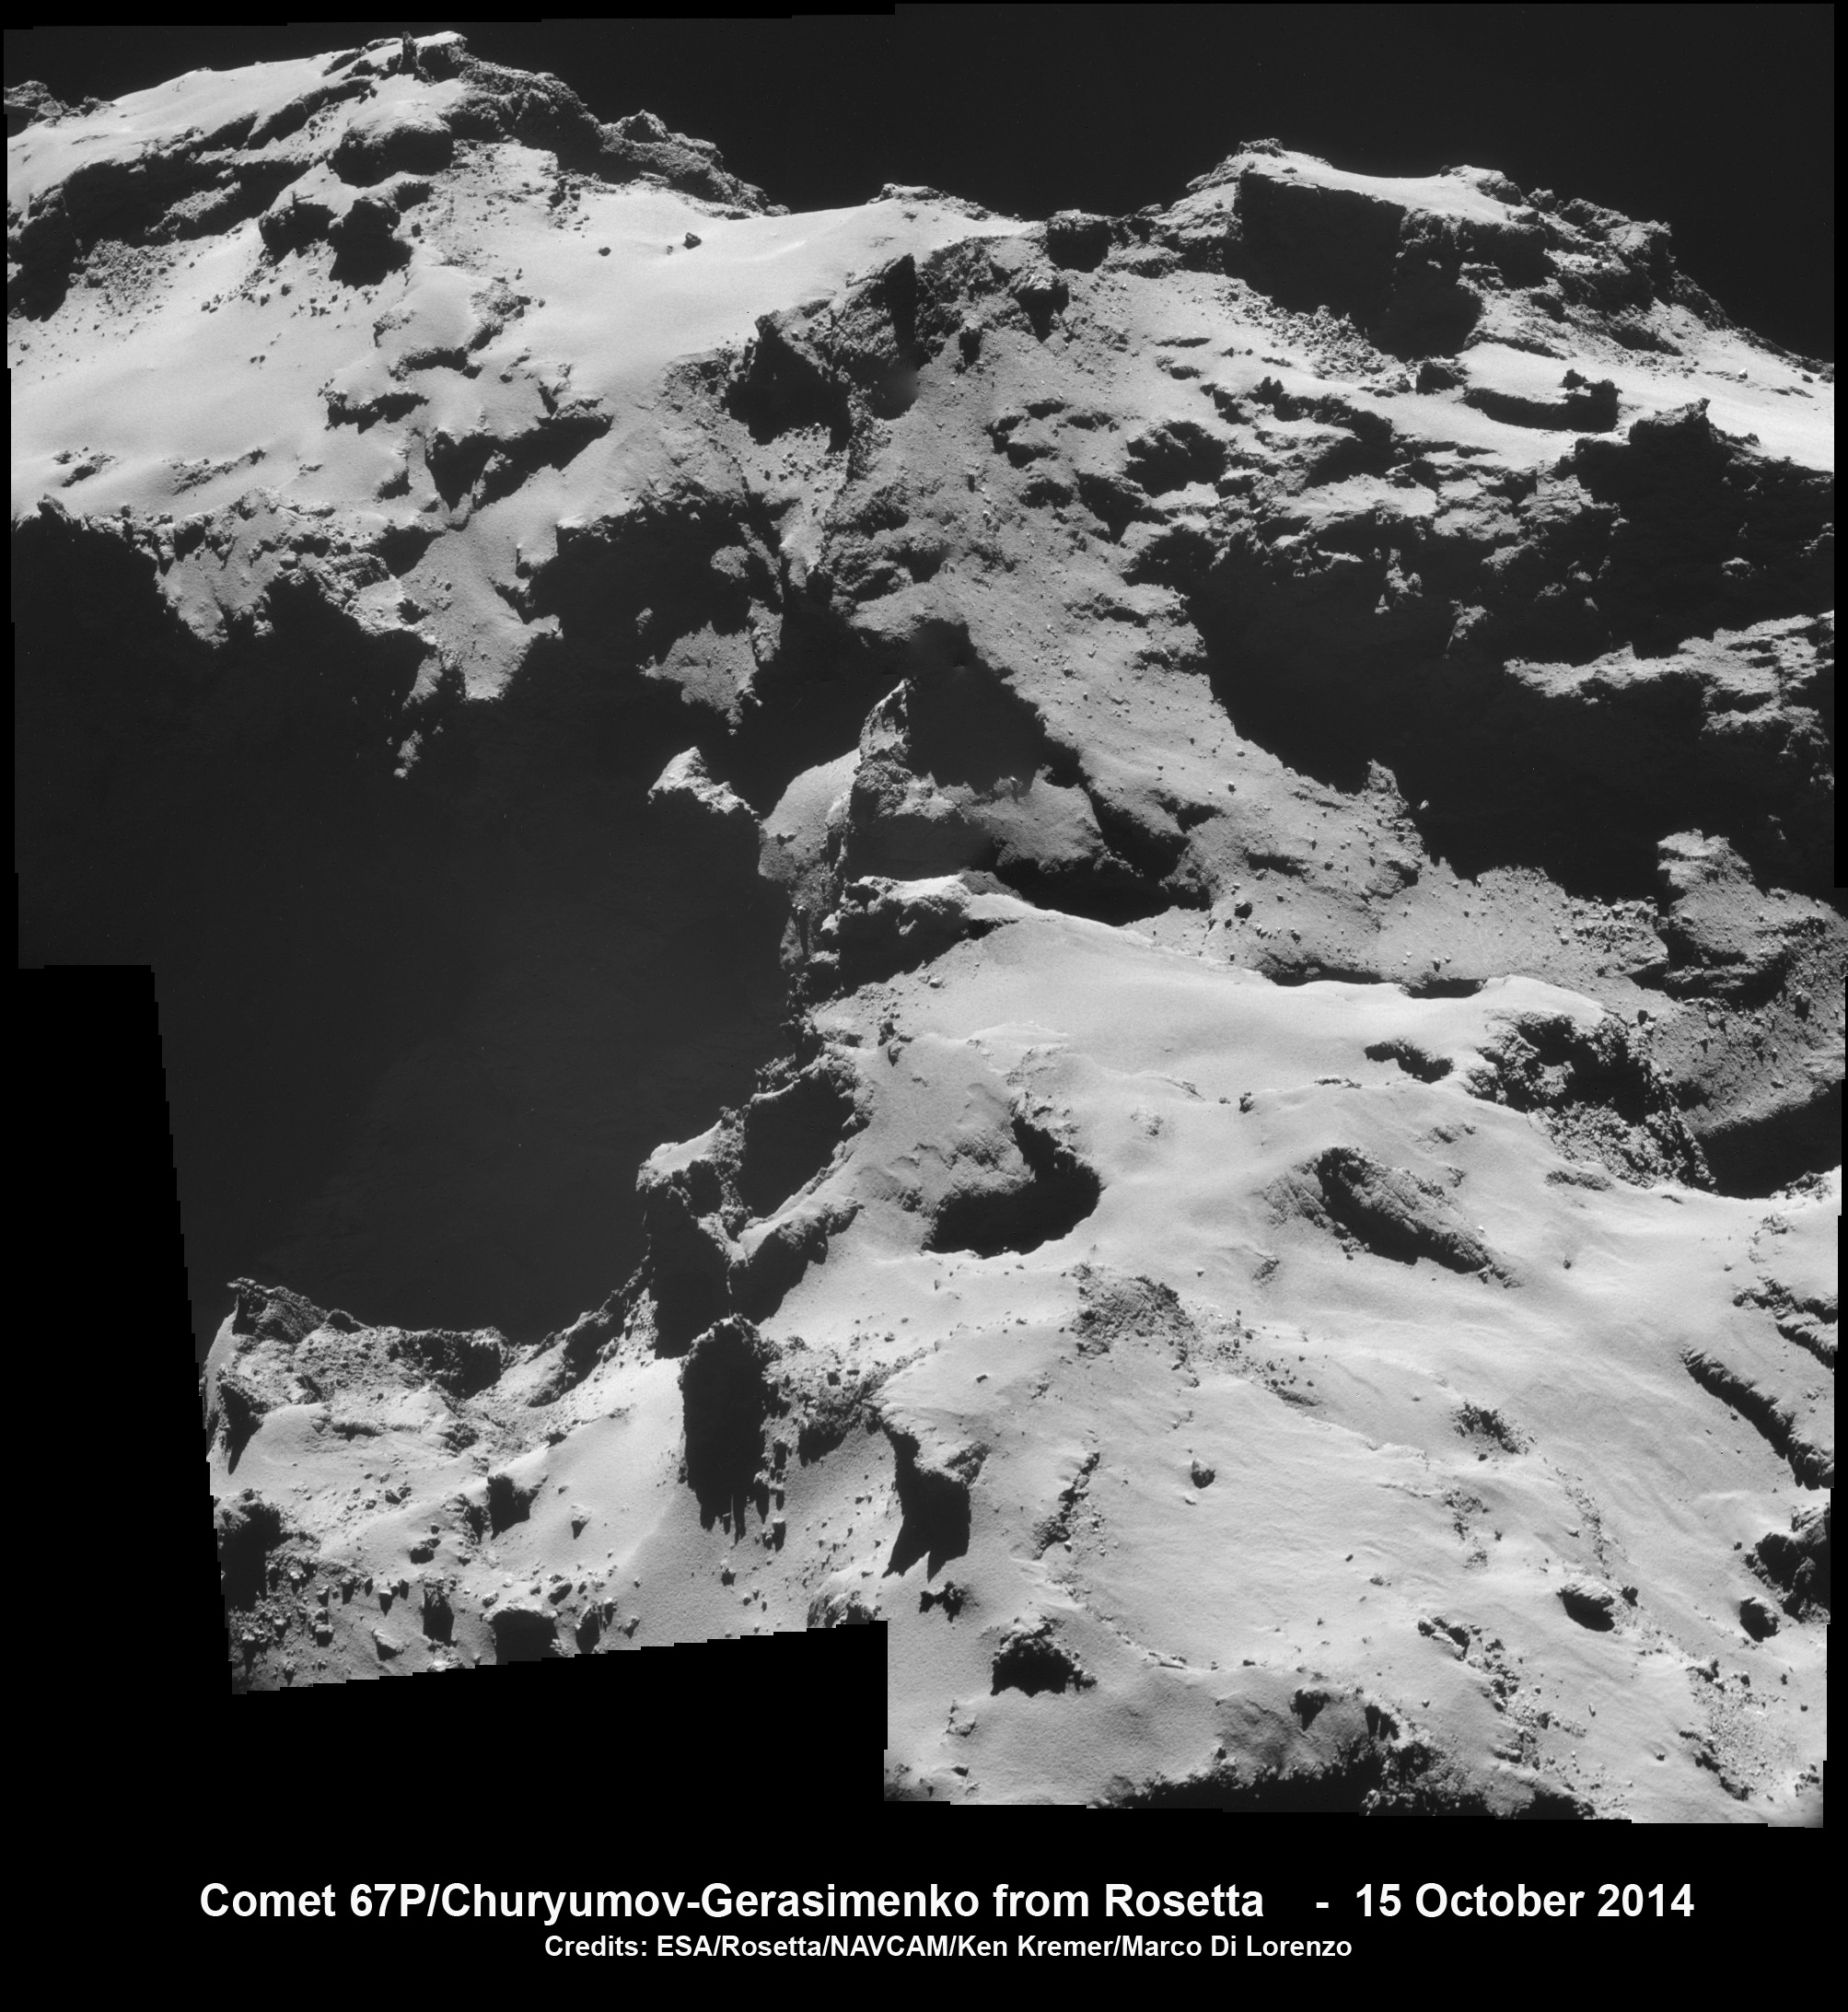 Four-image NAVCAM photo mosaic of Comet 67P/C-G taken on 15 October 2014, from a distance of 9.9 km from the centre of the comet.  Credits: ESA/Rosetta/NAVCAM/Ken Kremer -kenkremer.com/Marco Di Lorenzo